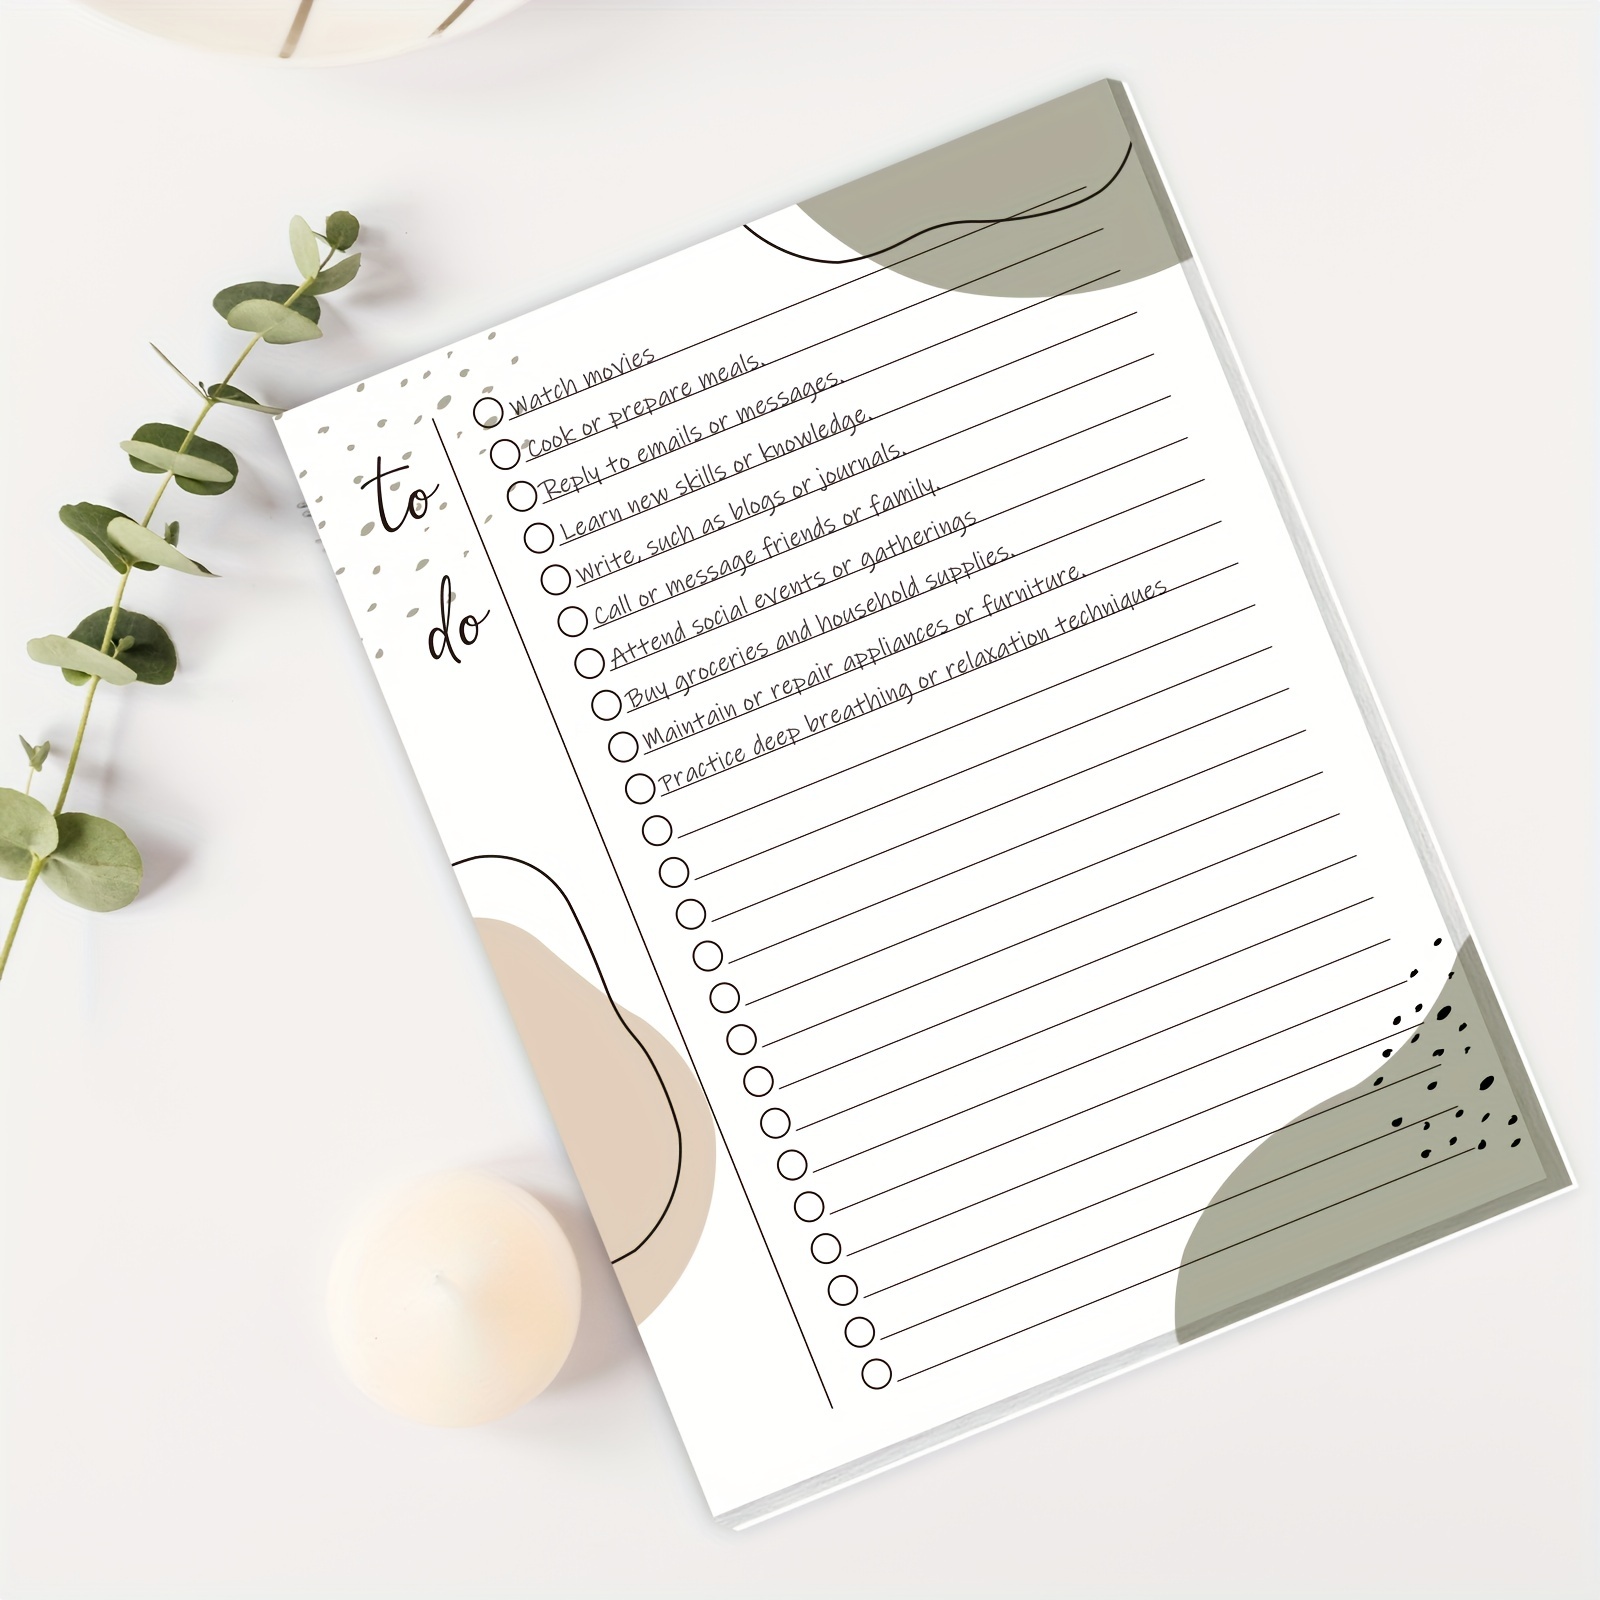  Daily to Do Notepads - Task Checklist planner, Time Management  planner, To Do lists, Organizer with Today's Goals, Notes, 52 Undated  Agenda Tear-off Sheets, 6.5 x 9.8 inches (Pink) : Office Products